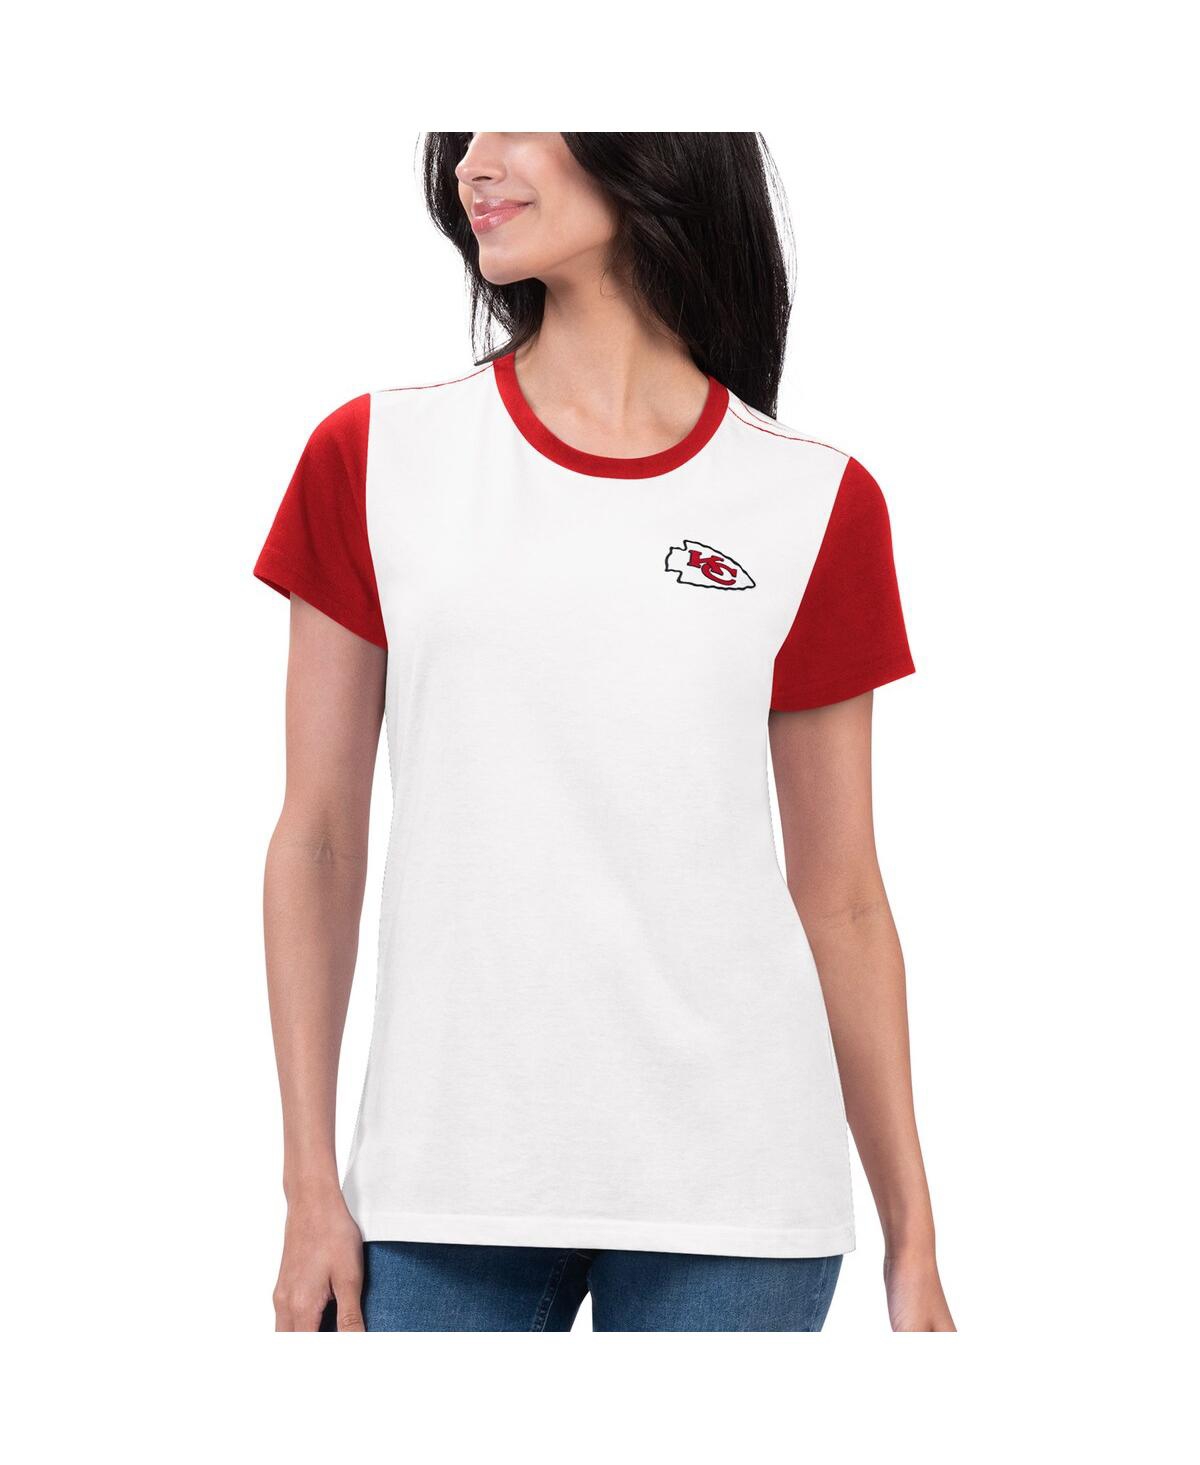 Women's G-iii 4Her by Carl Banks White, Red Kansas City Chiefs Fashion Illustration T-shirt - White, Red